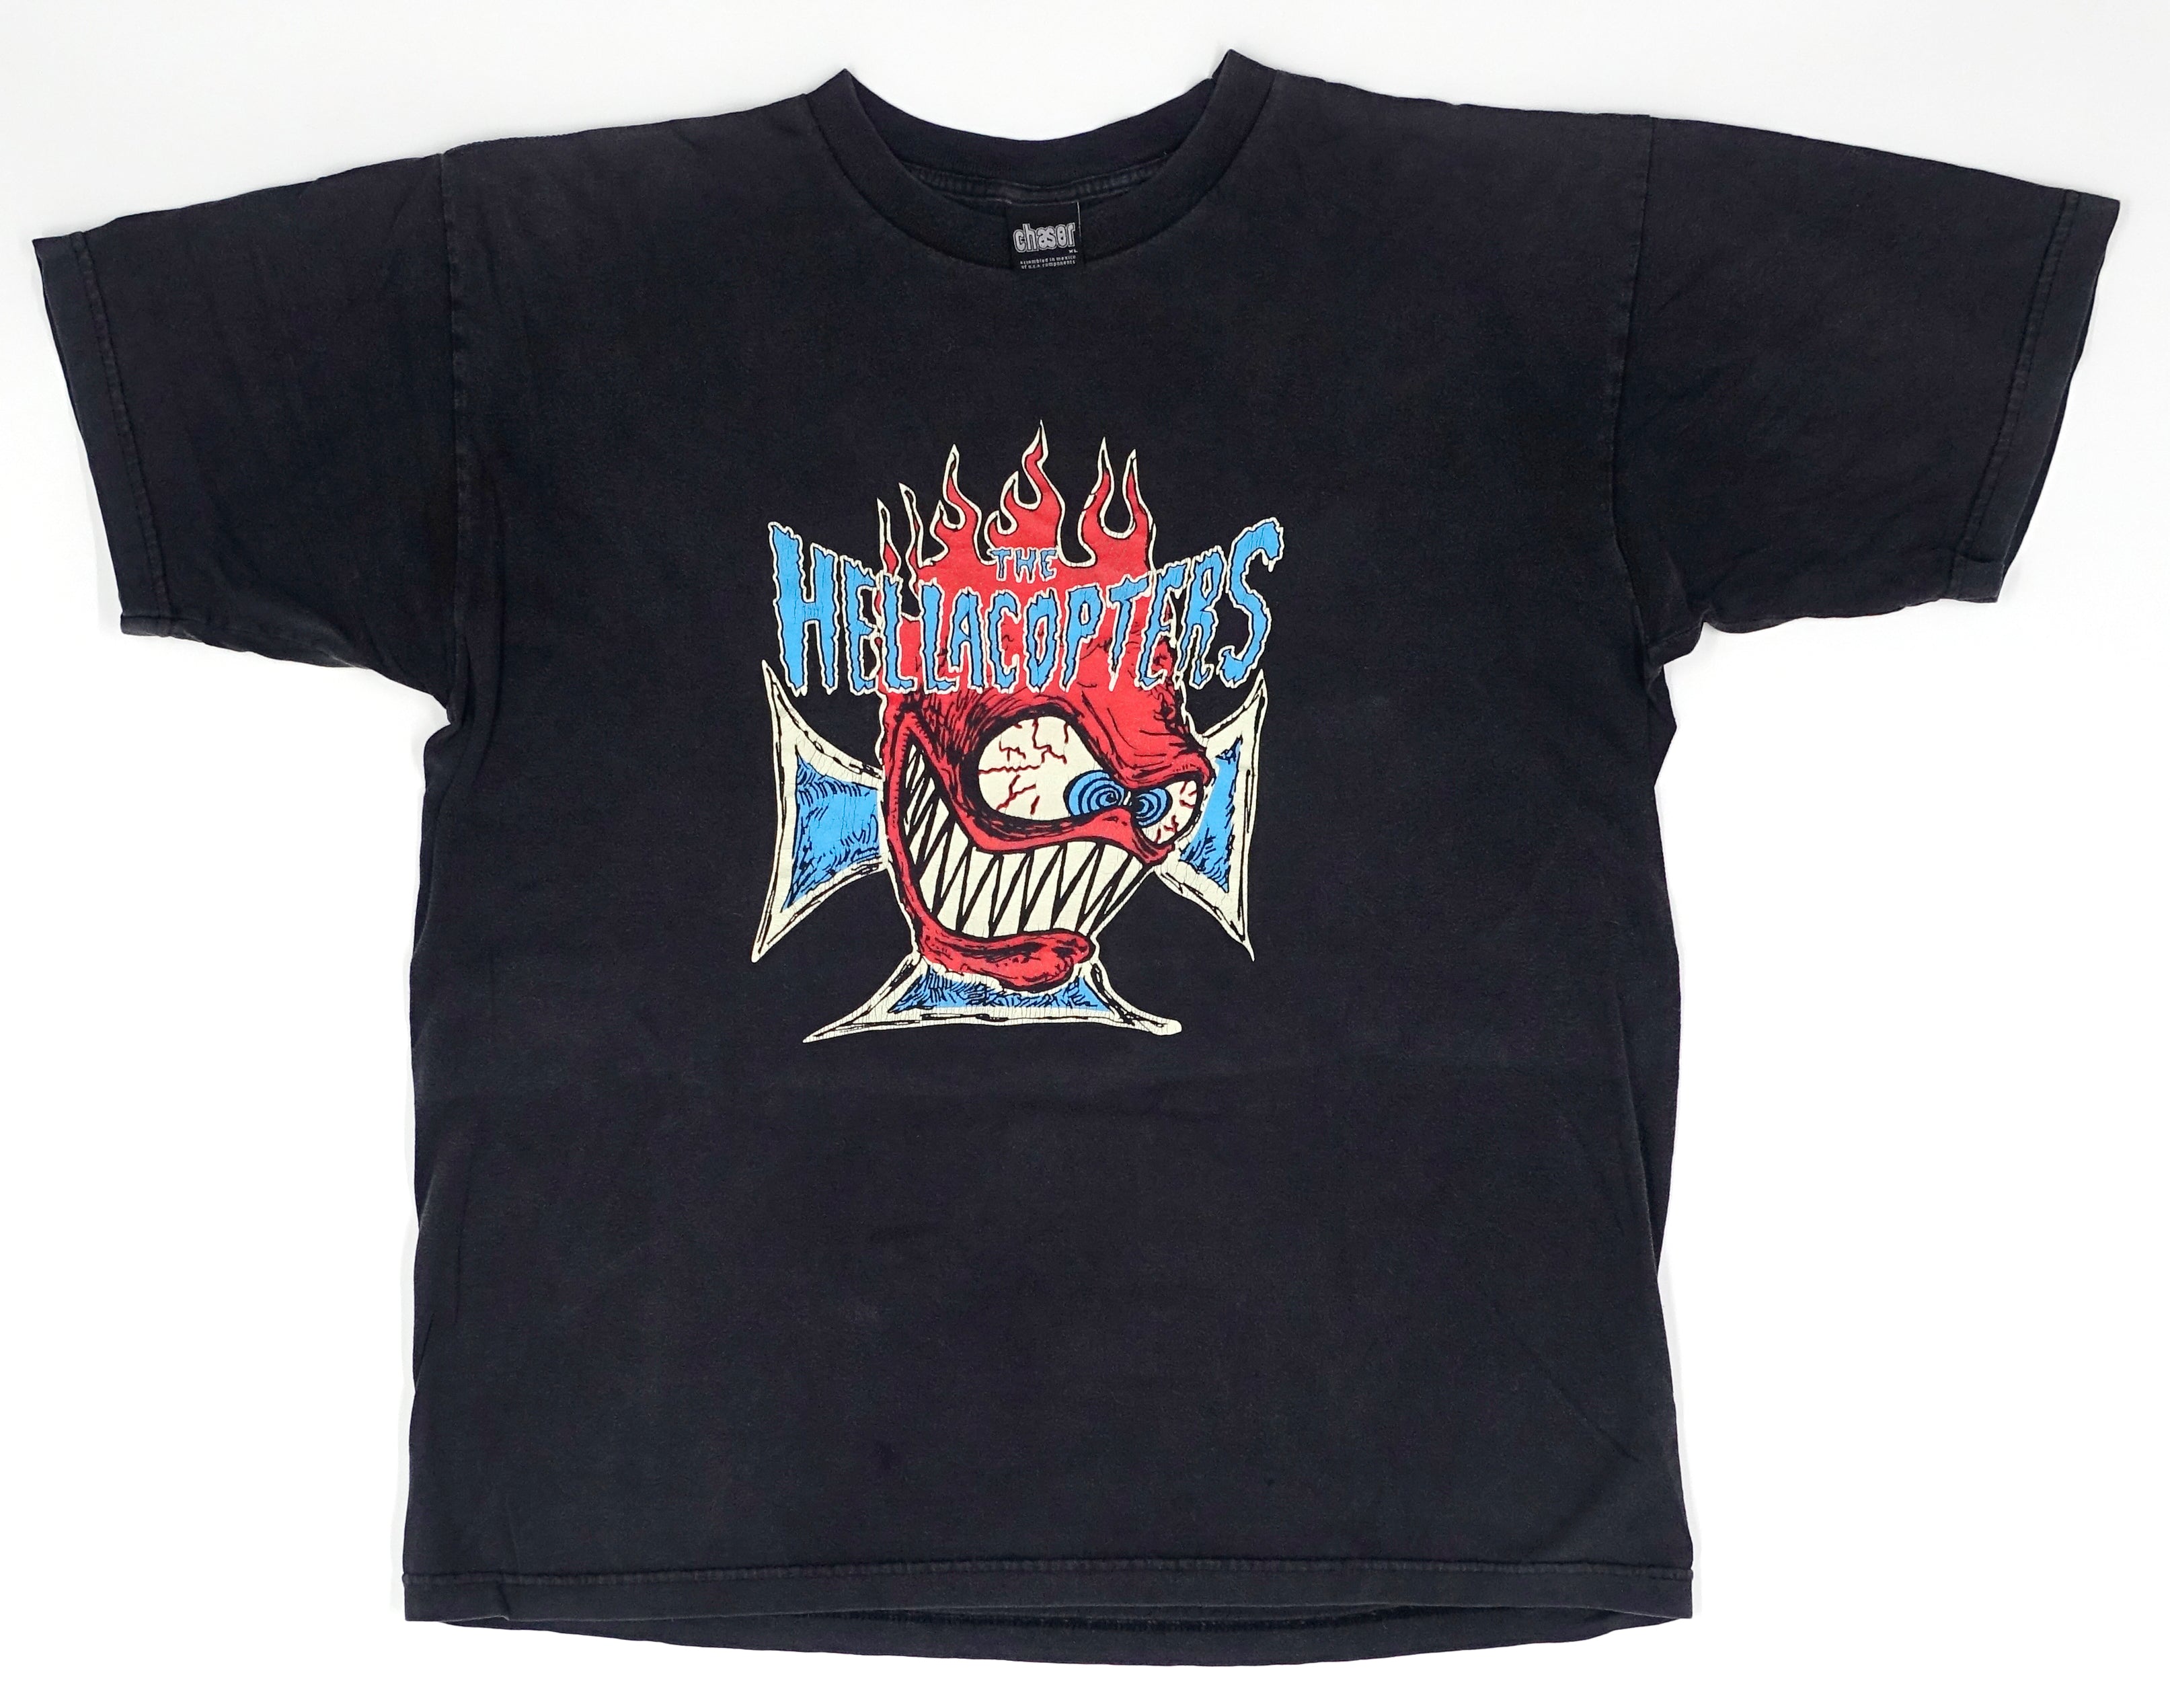 the Hellacopters - Grande Rock 1999 Tour Shirt Size XL